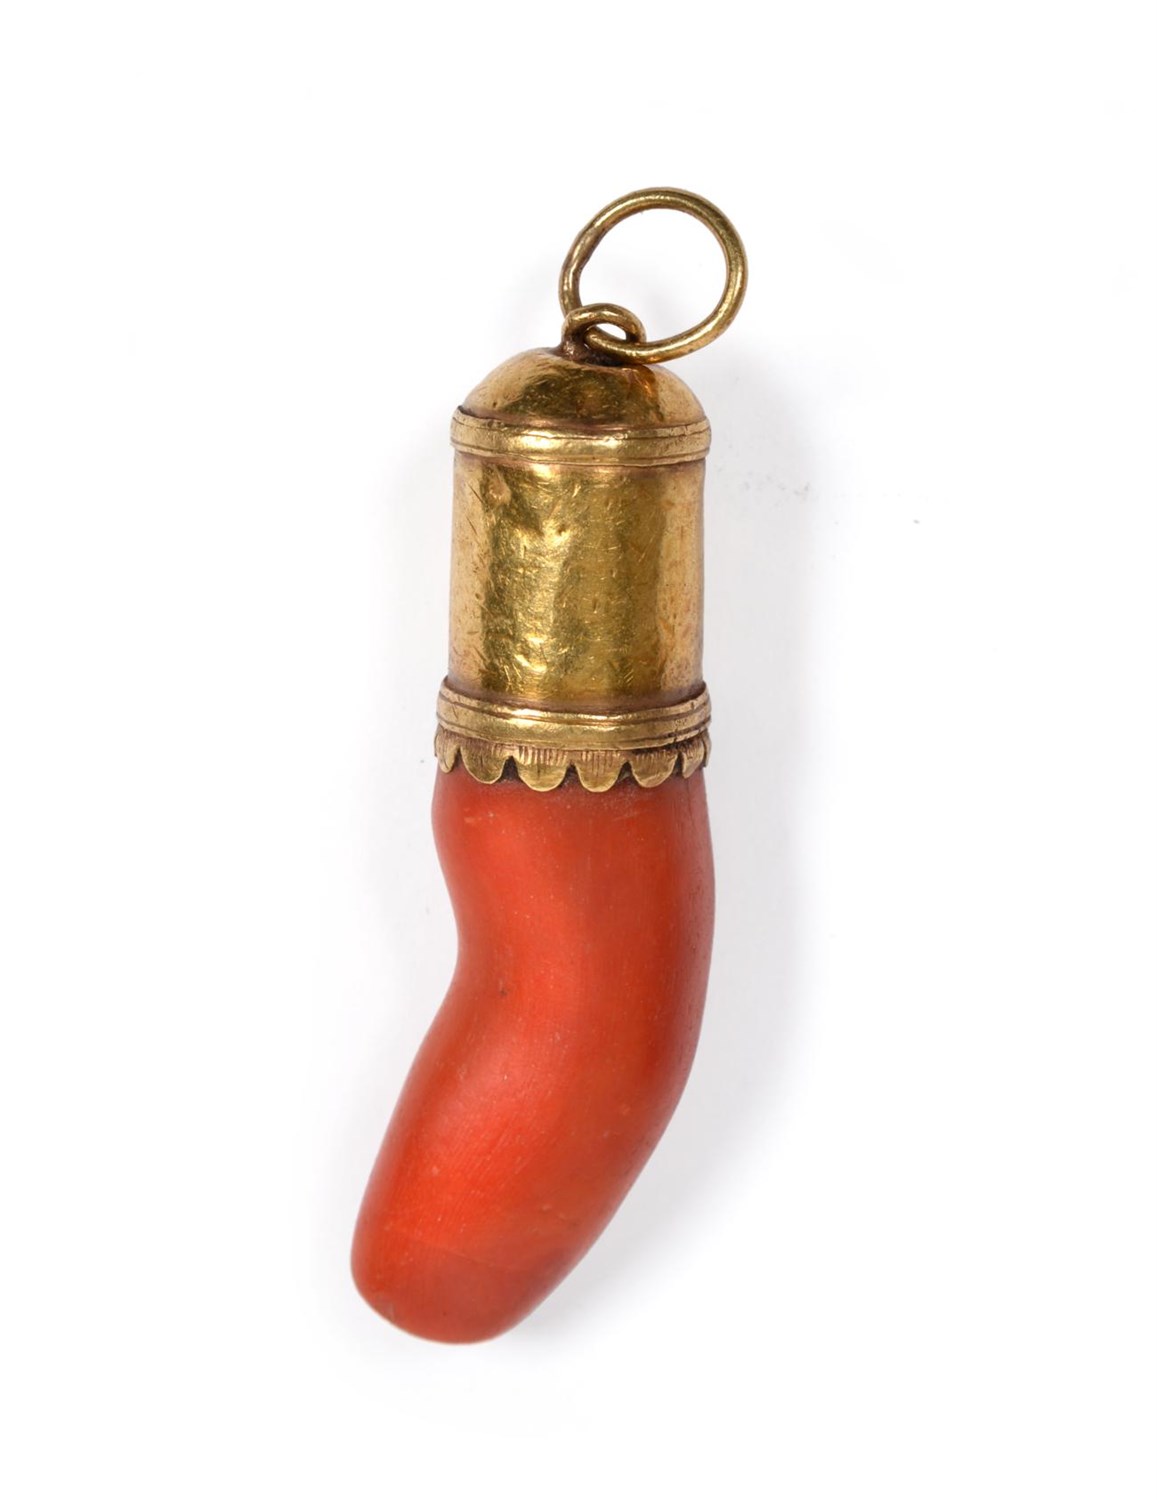 Lot 376 - A Coral Amulet, possibly 17th century, the deep red coral pendant of natural form, mounted in a...